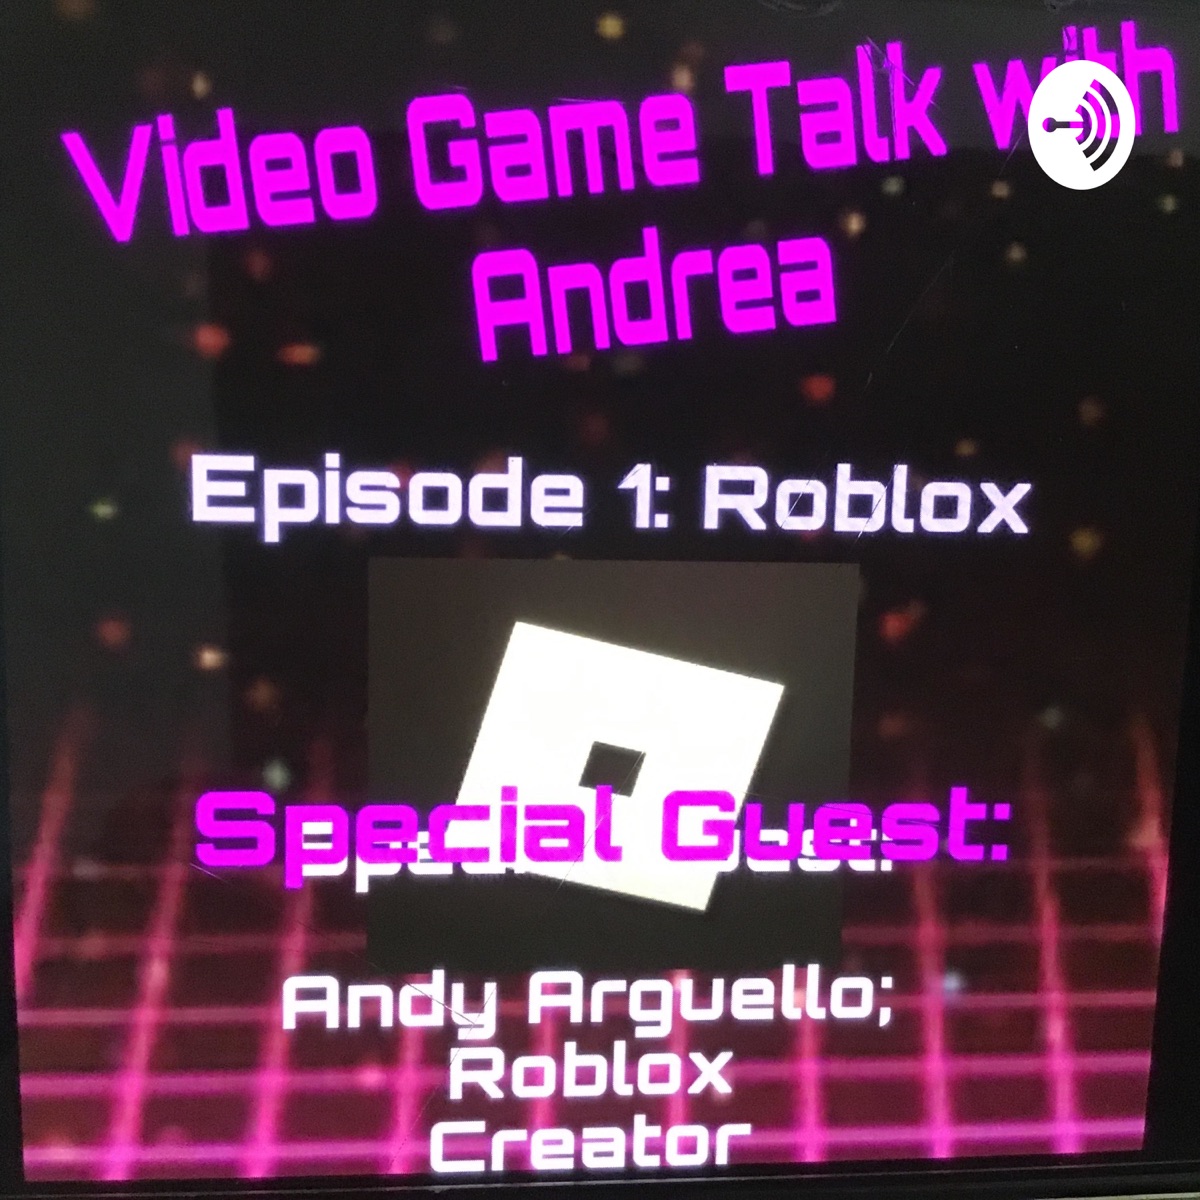 Related Roblox Podcast Podtail - apollo ie roblox